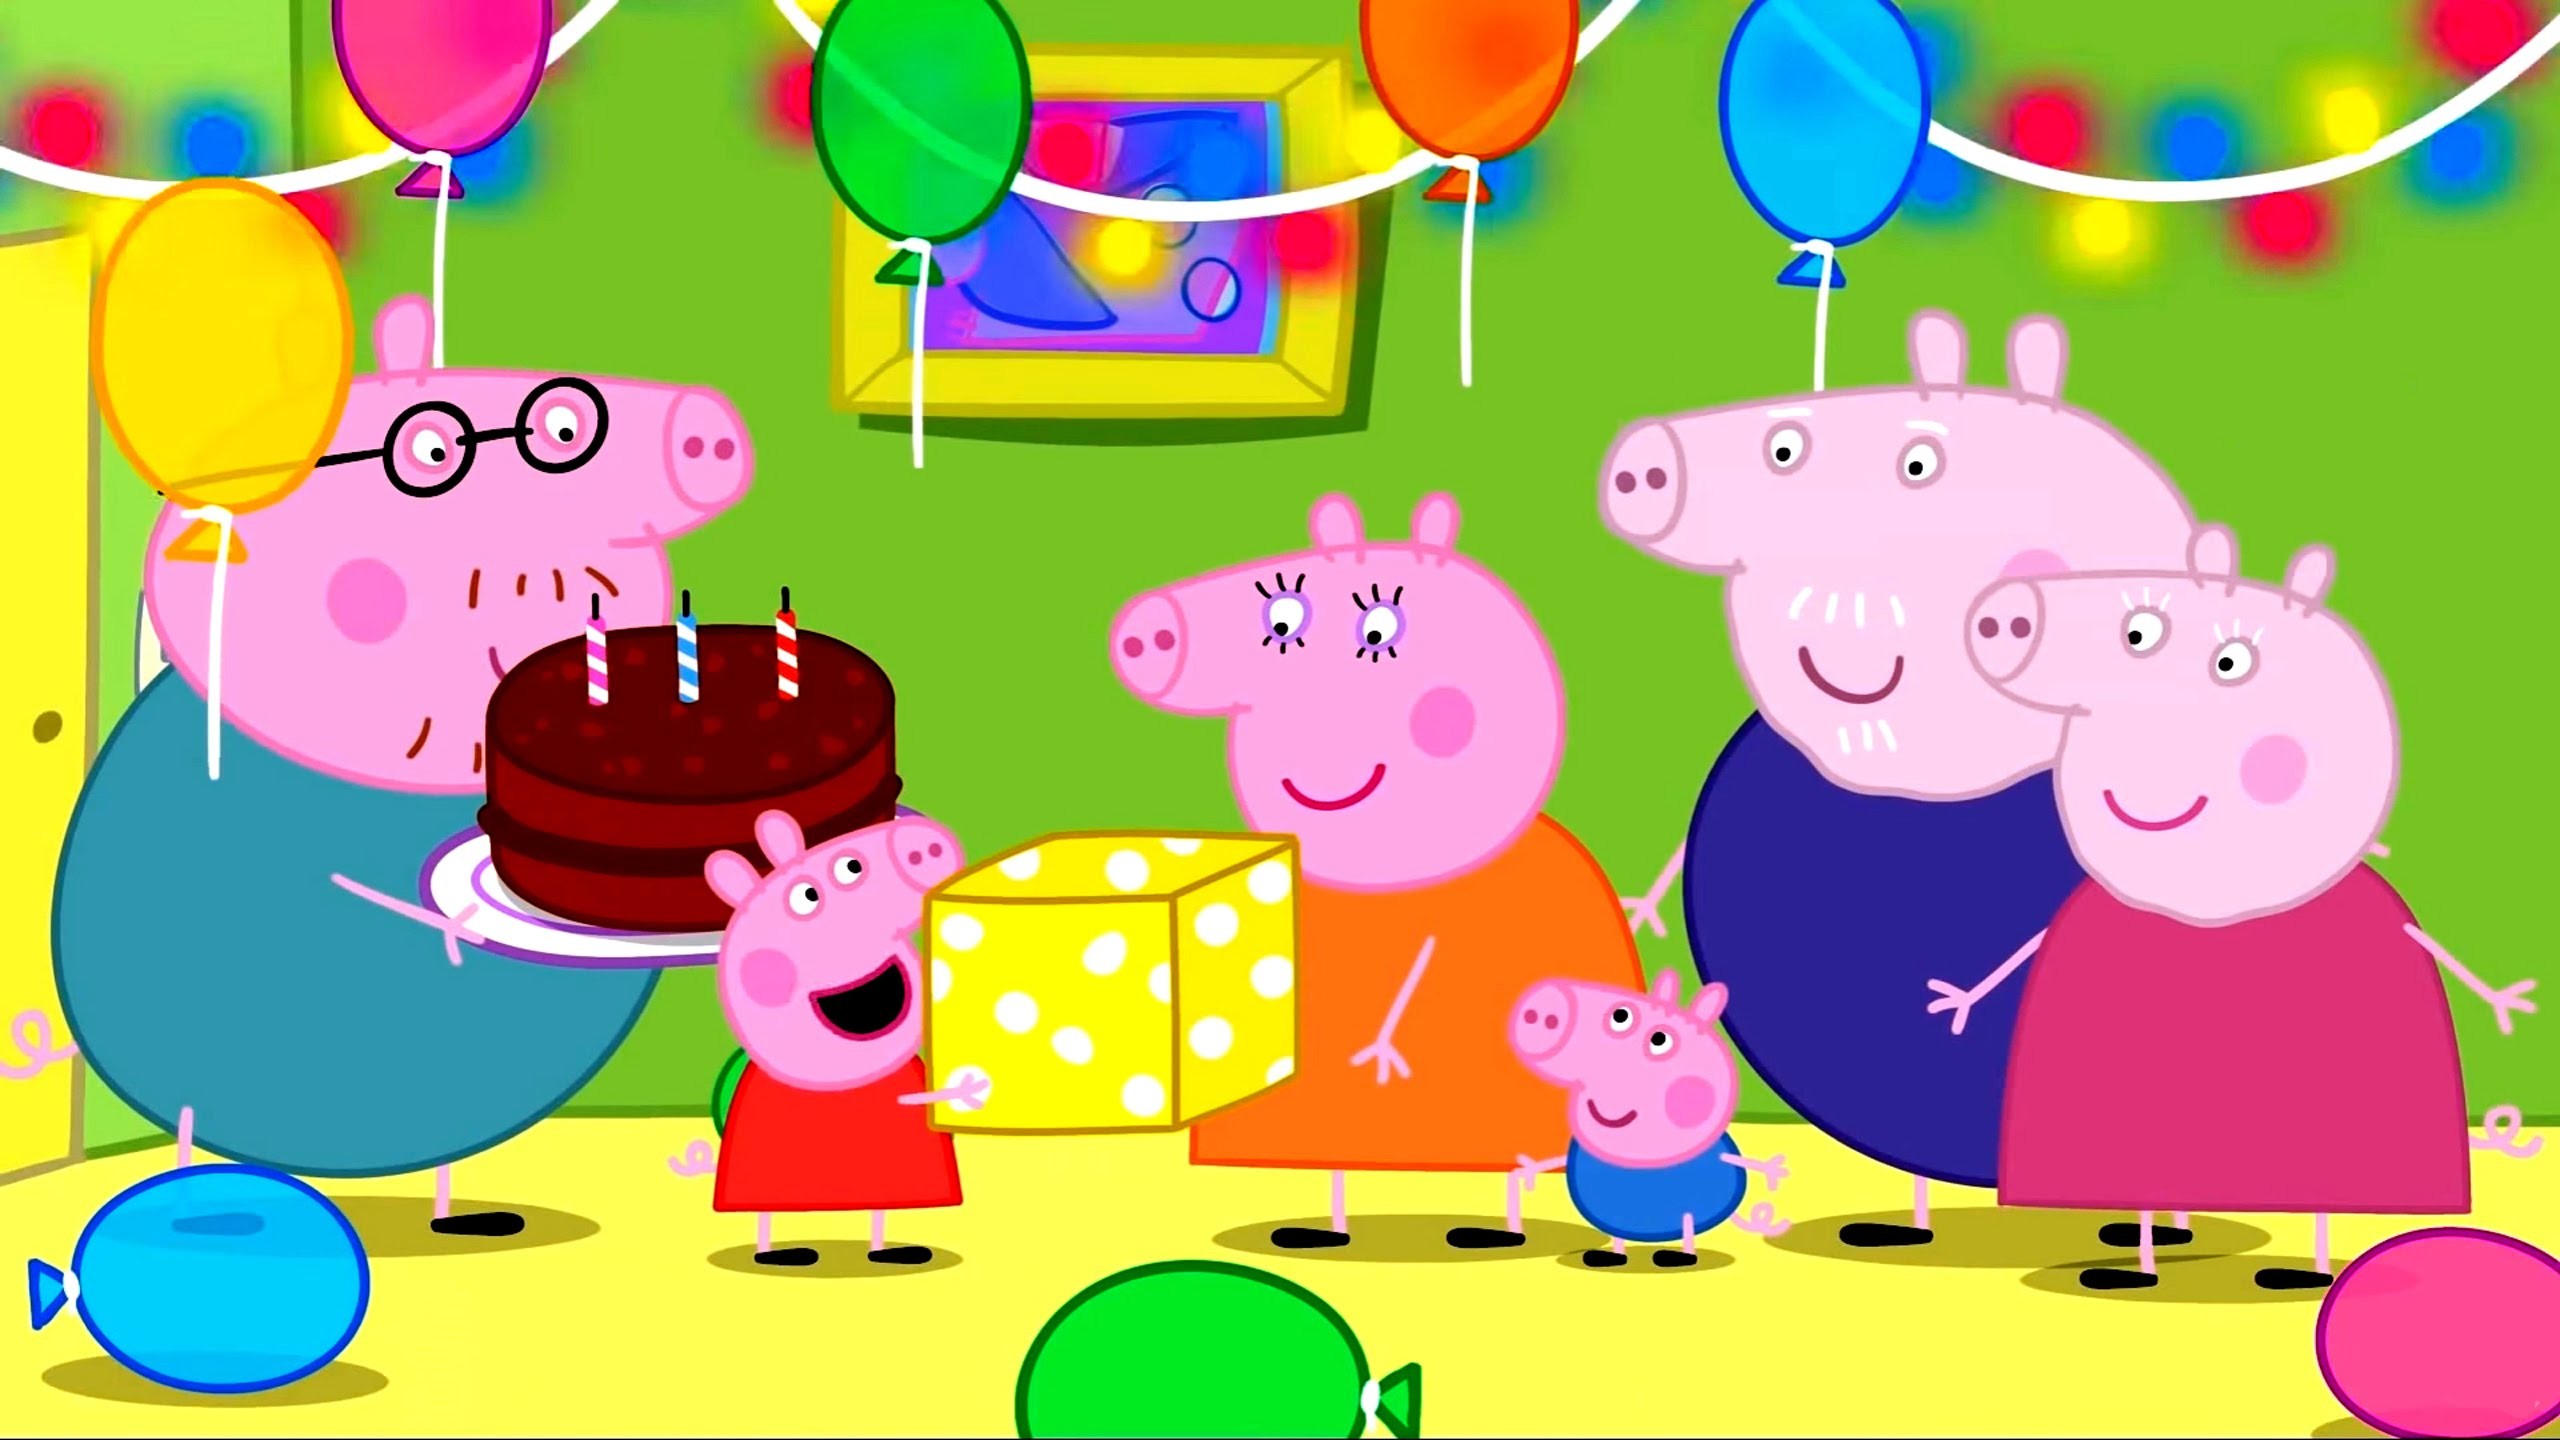 2560x1440 Peppa Pig Coloring Pages for Kids Peppa Pig Coloring Games Peppa Pig daddy  pig mummy Birthday day - YouTube